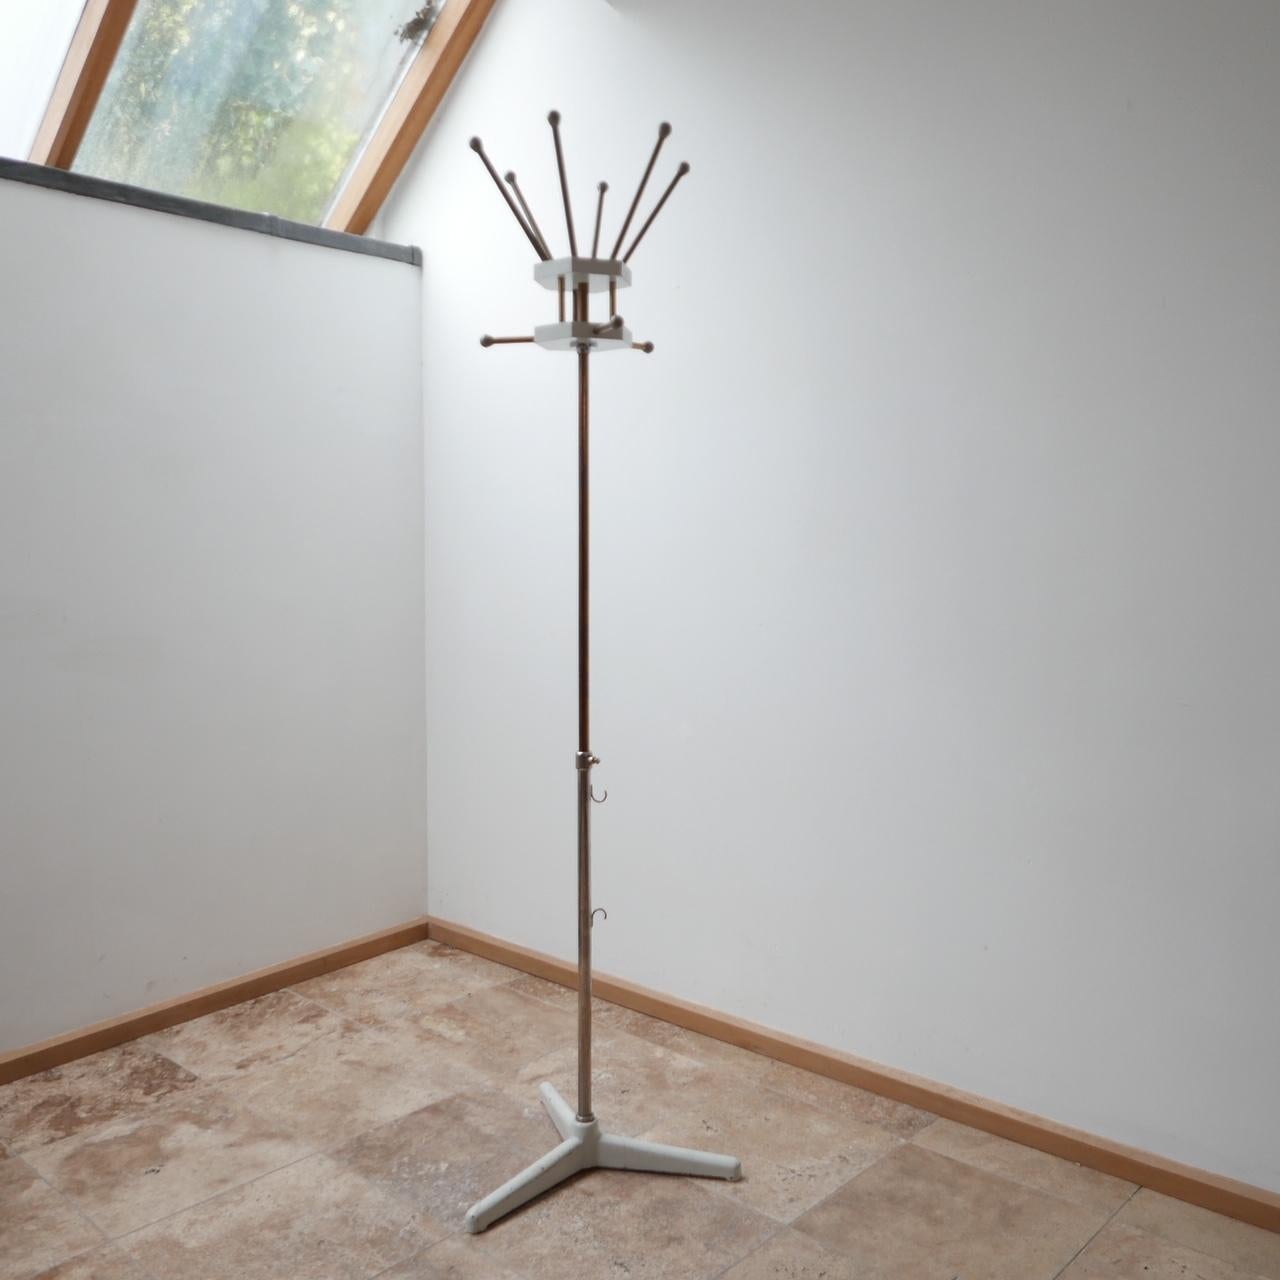 A Scandinavian coat rack.

Adjustable in height,

circa 1960s.

A combination of metals, with copper, steel and brass aspects.

Dimensions: 50 diameter at base x 186 height in photo. Adjusted up to 230 height in cm.